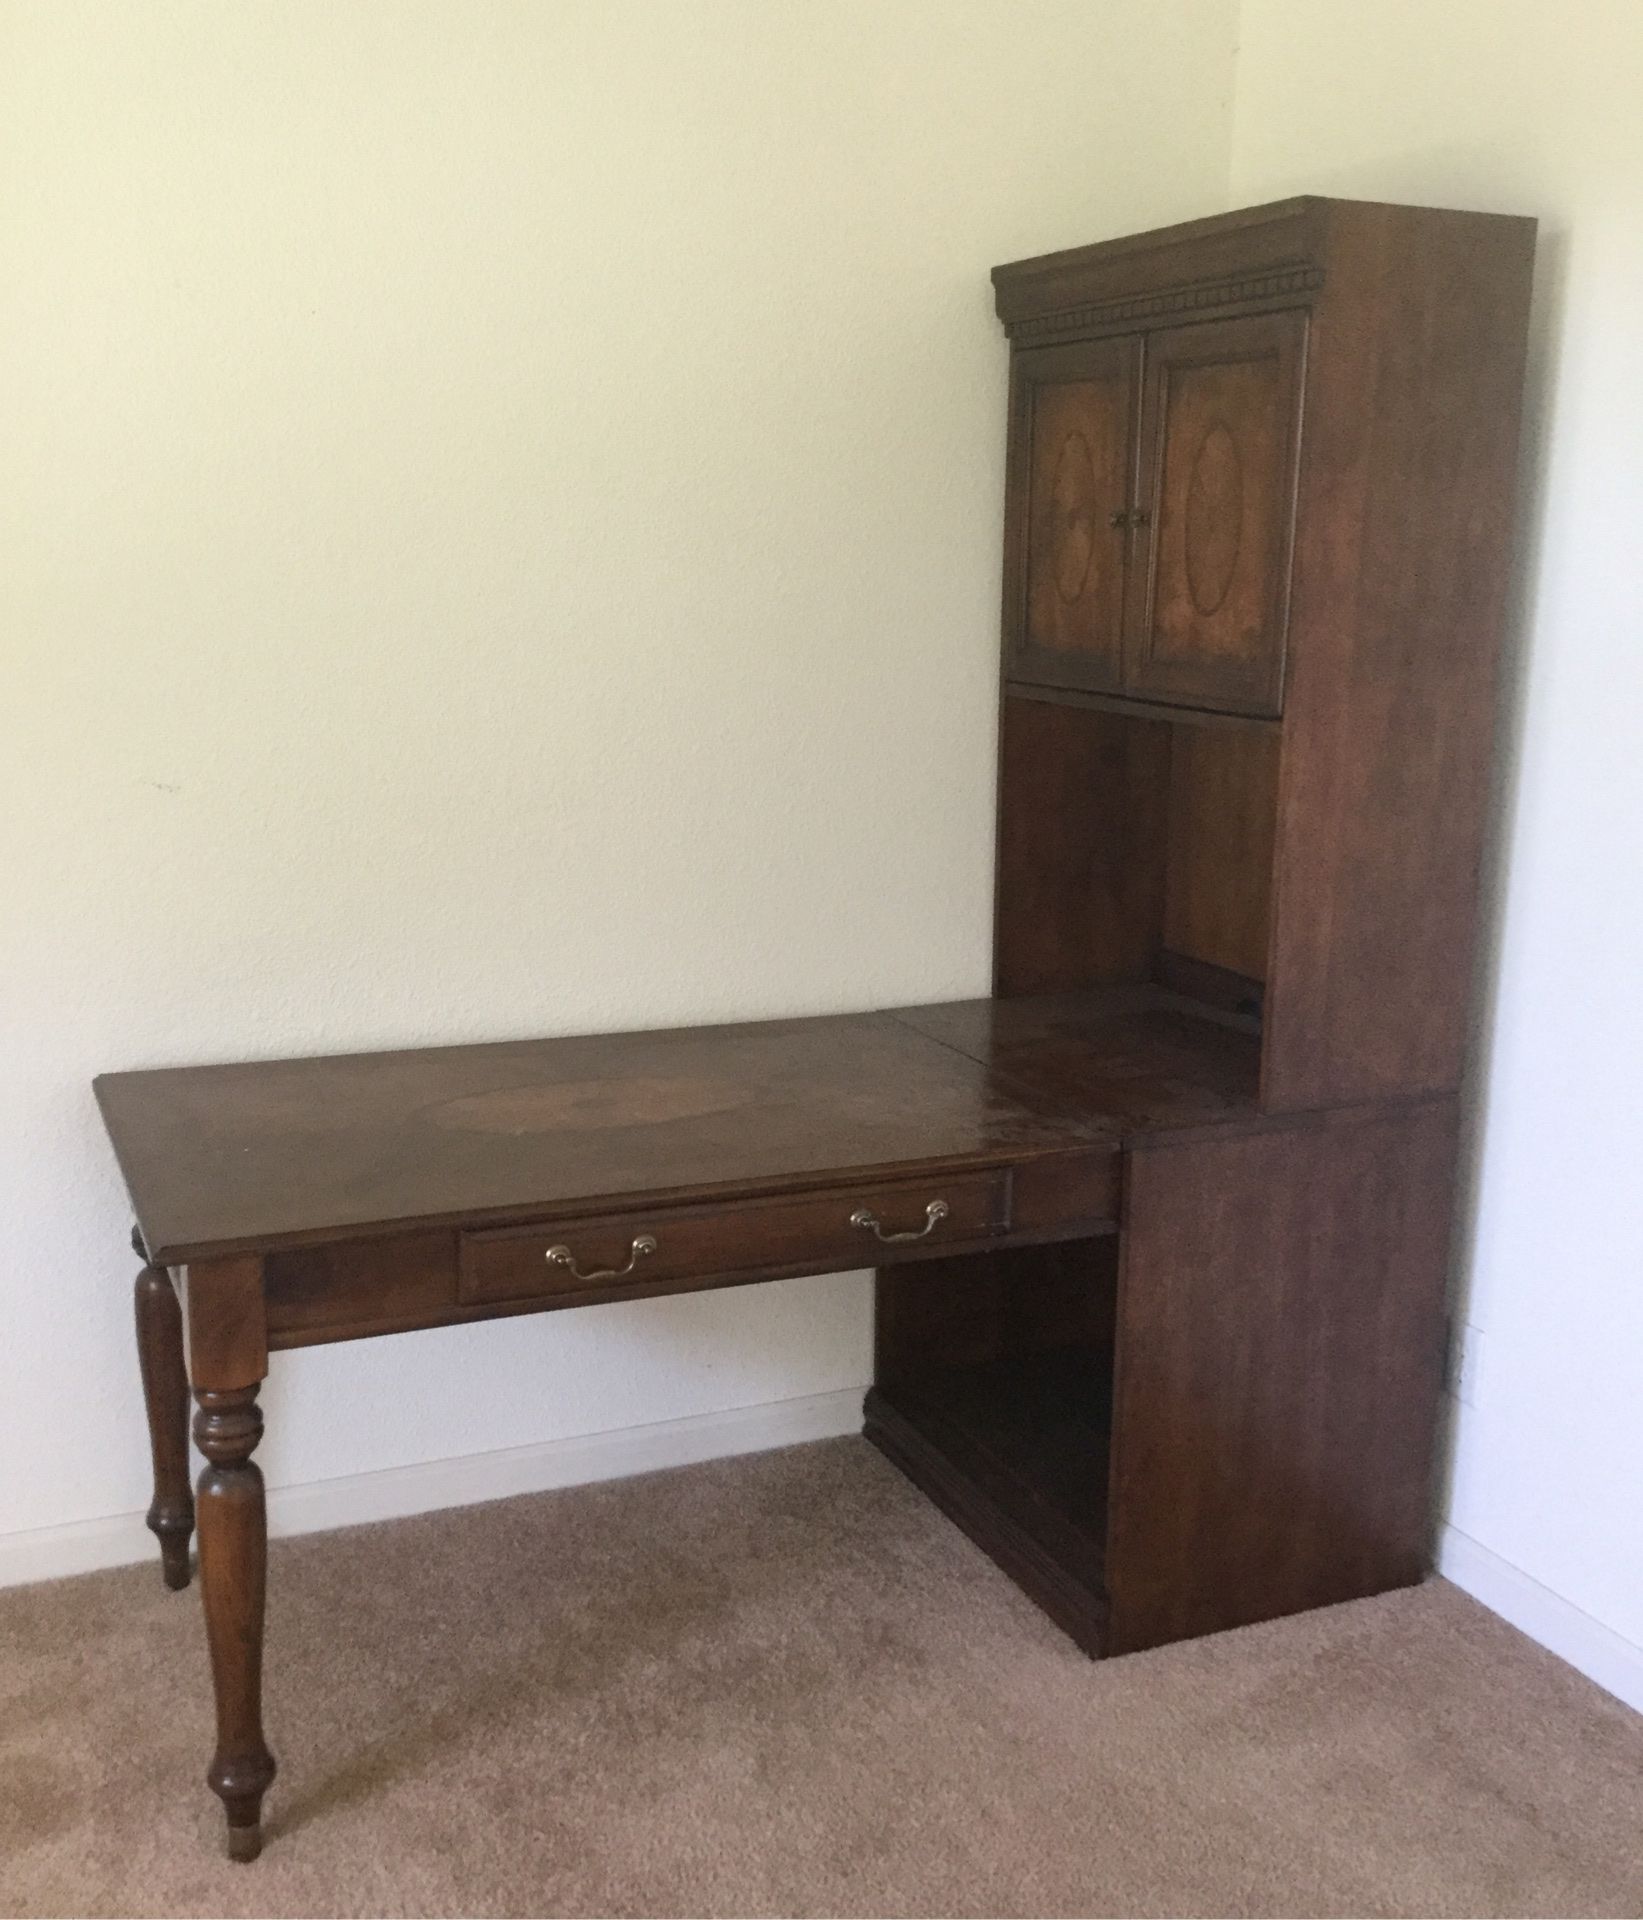 FREE desk with shelving!